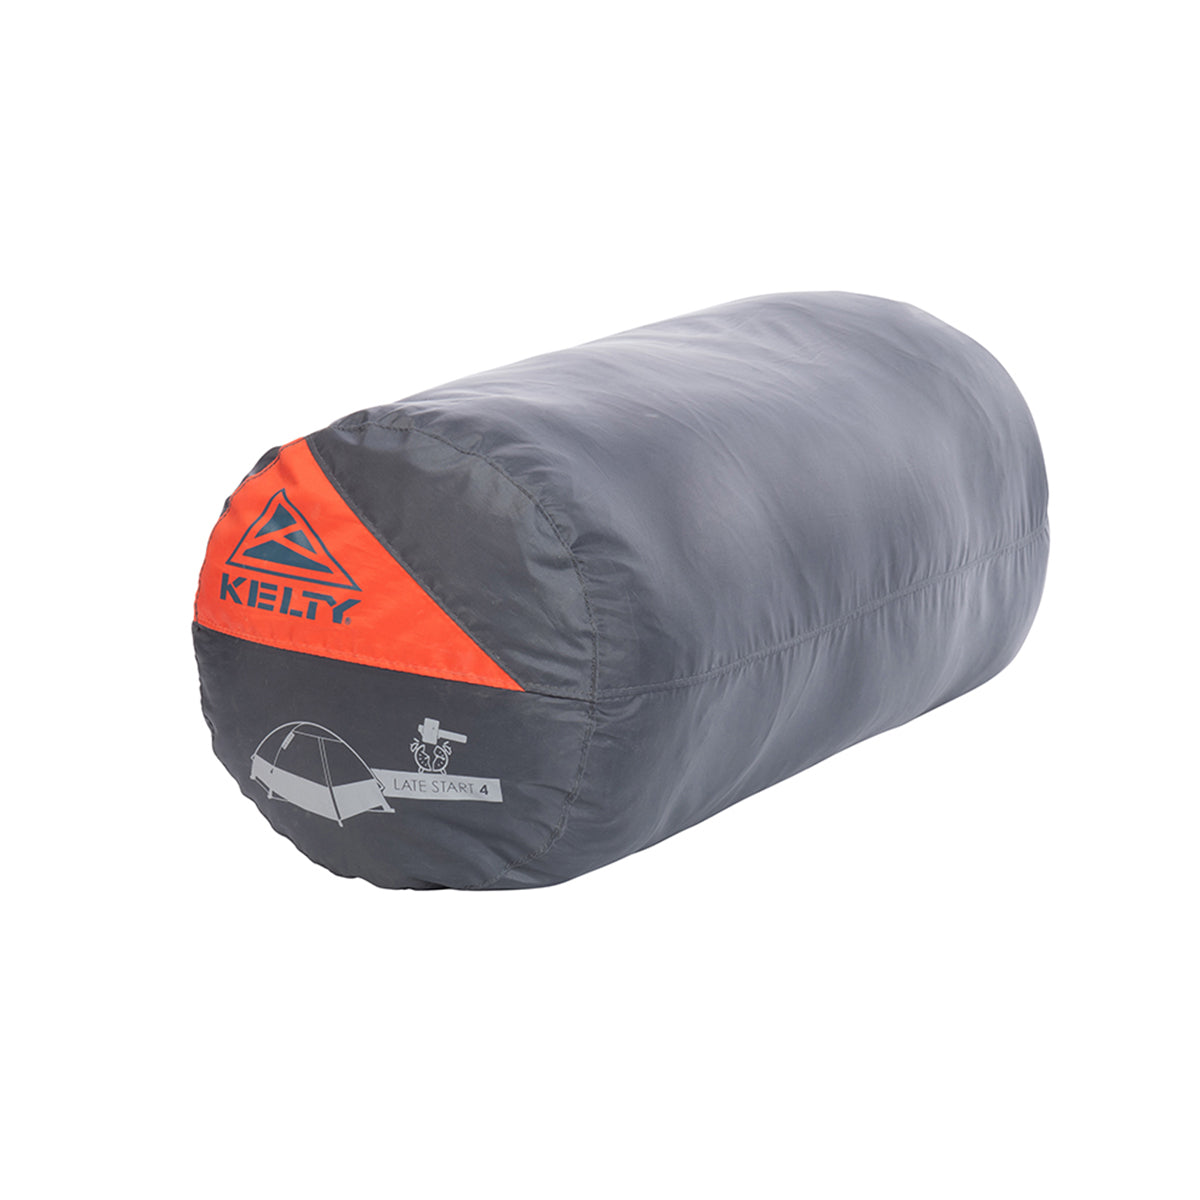 kelty late start 4 person tent in stuff sack